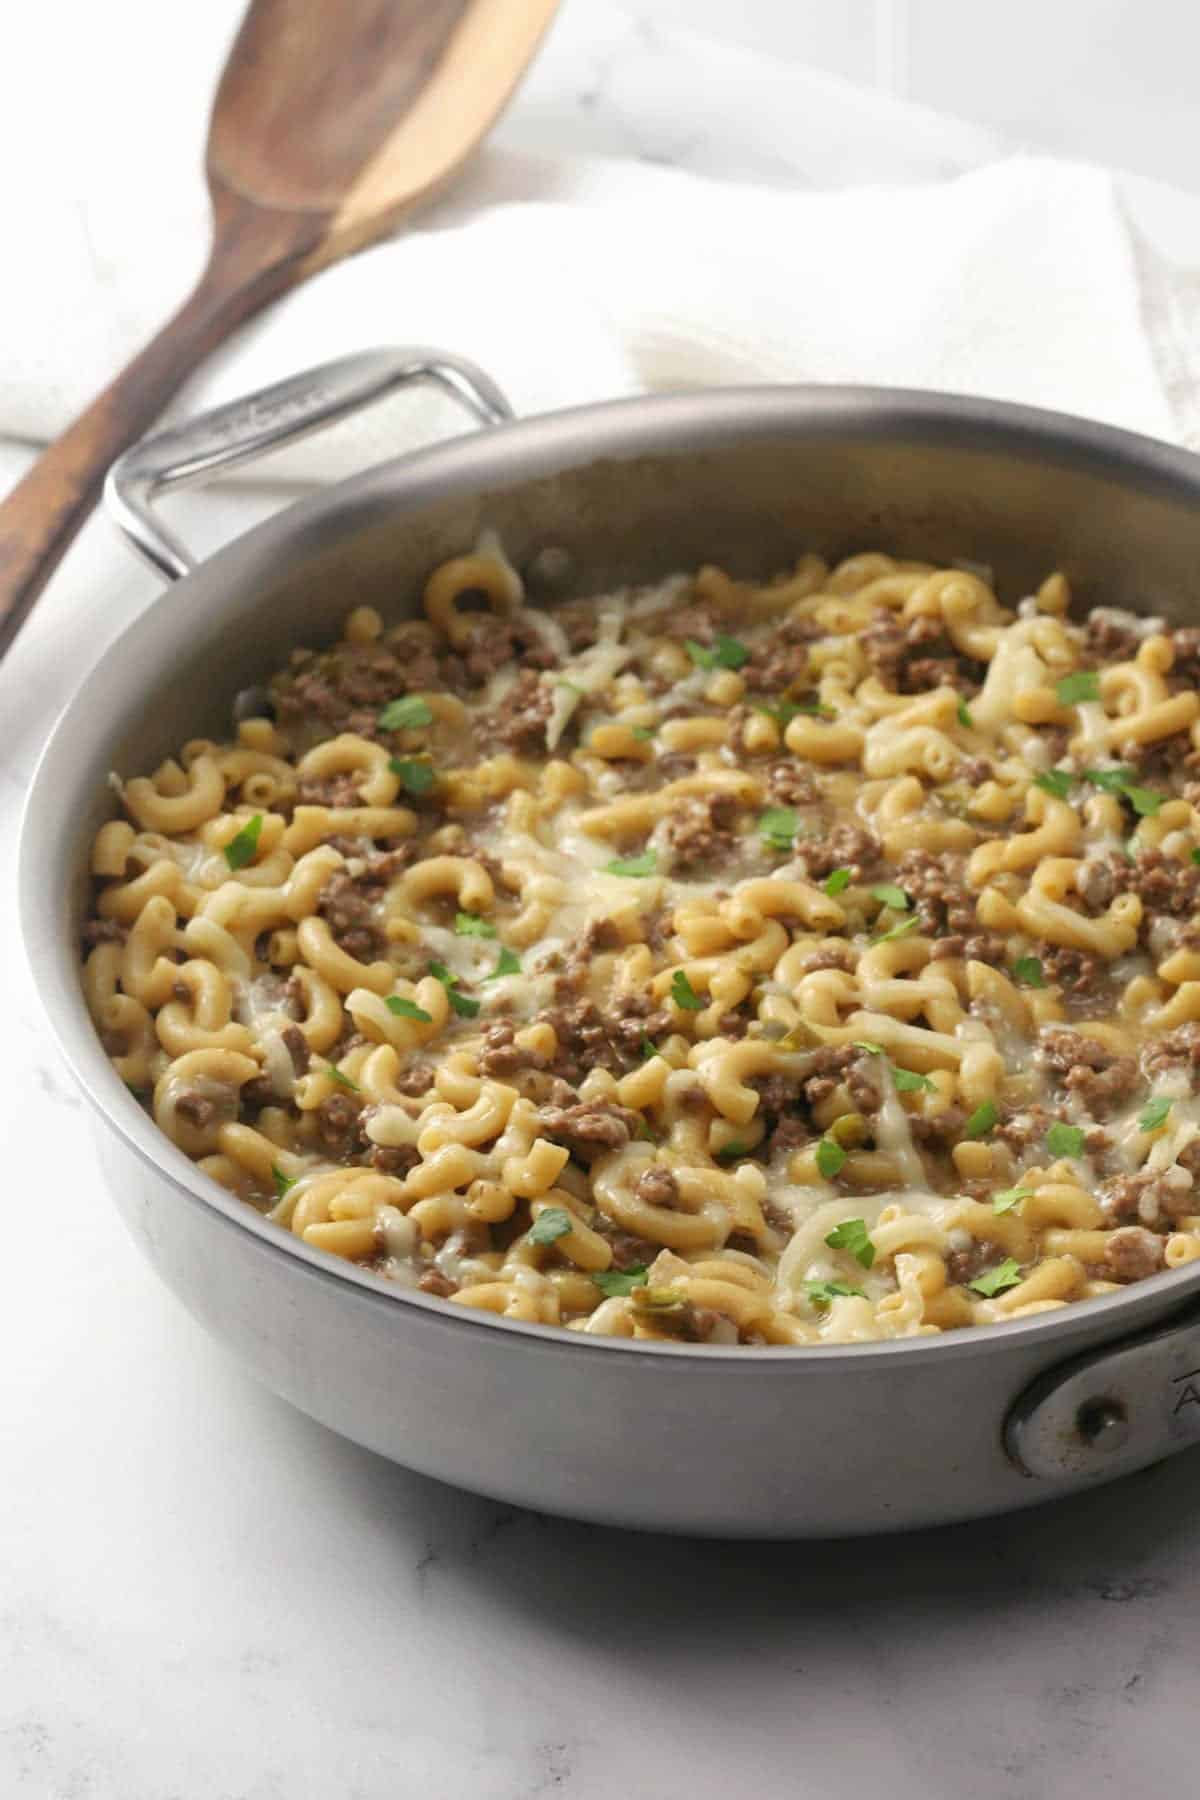 Saute pan filled with ground beef and pasta in cheesy sauce.